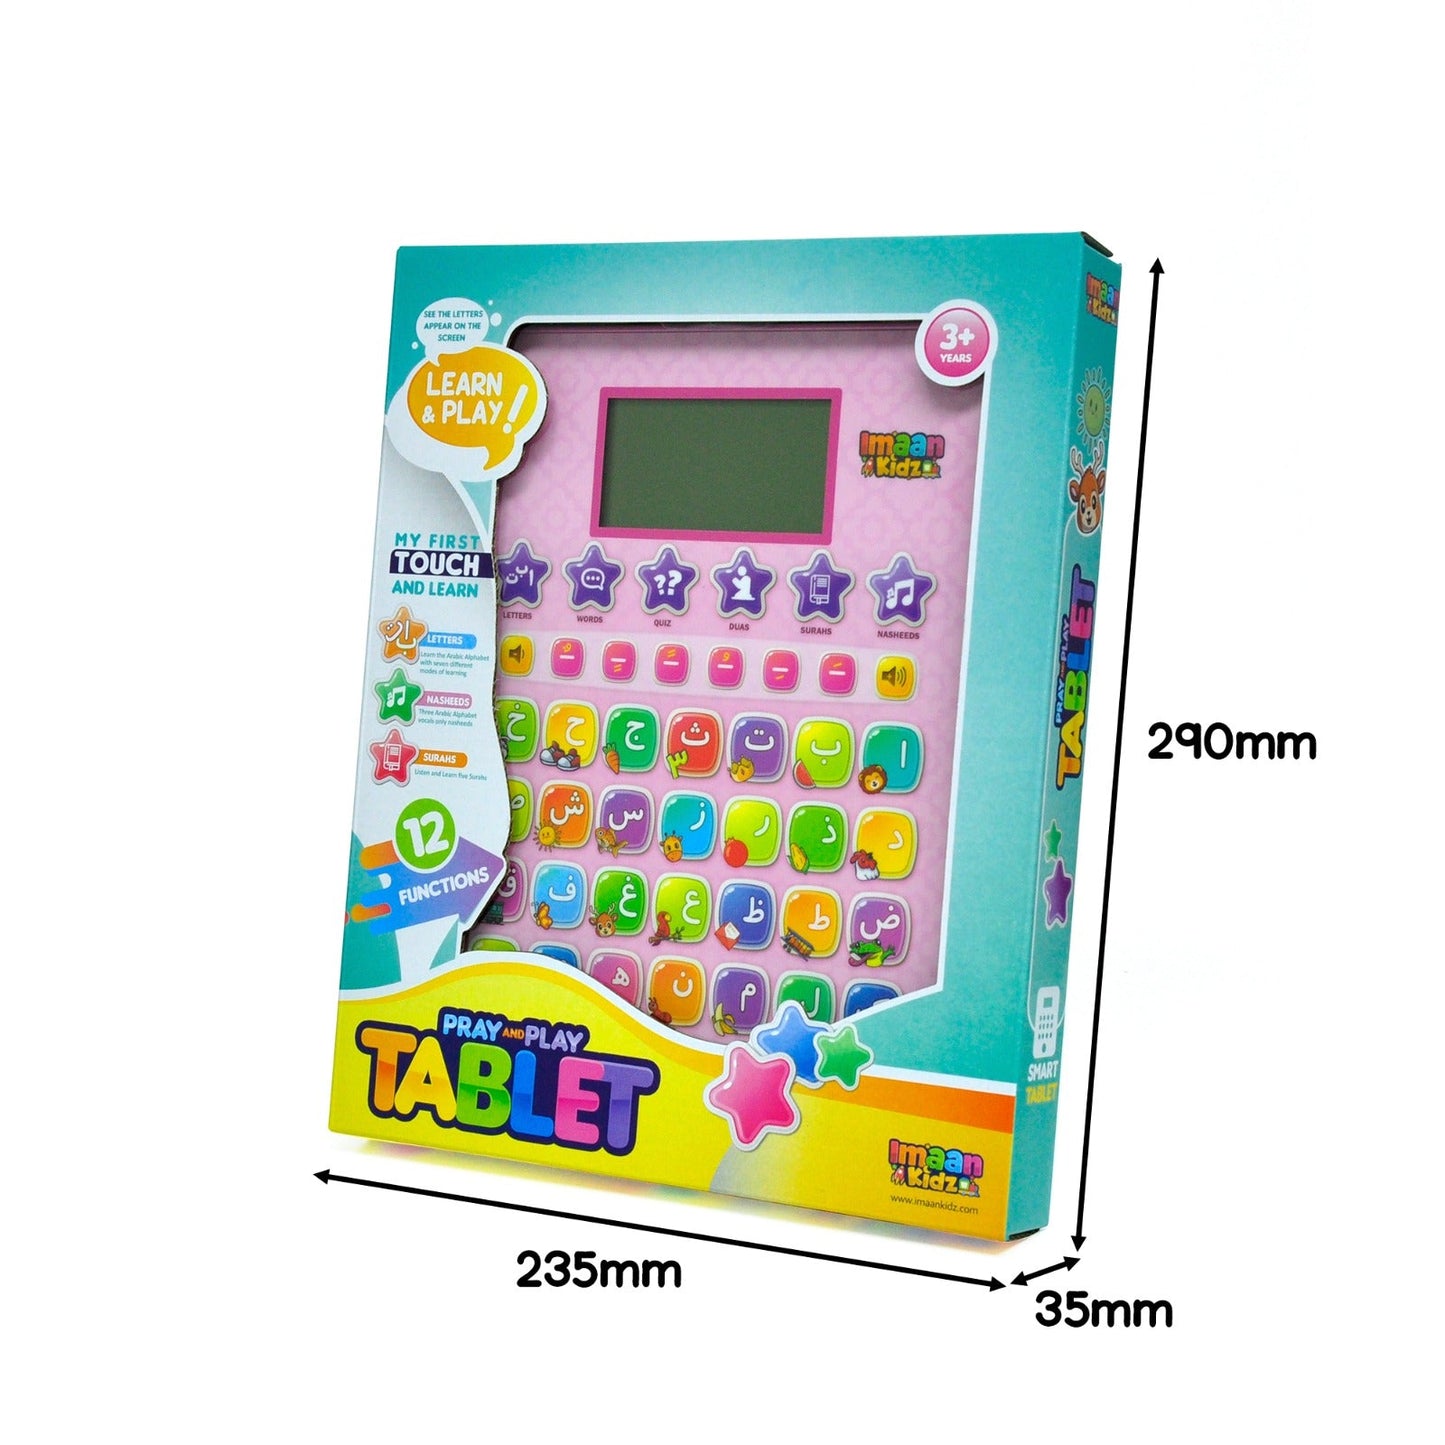 Pray and Play Tablet - Pink